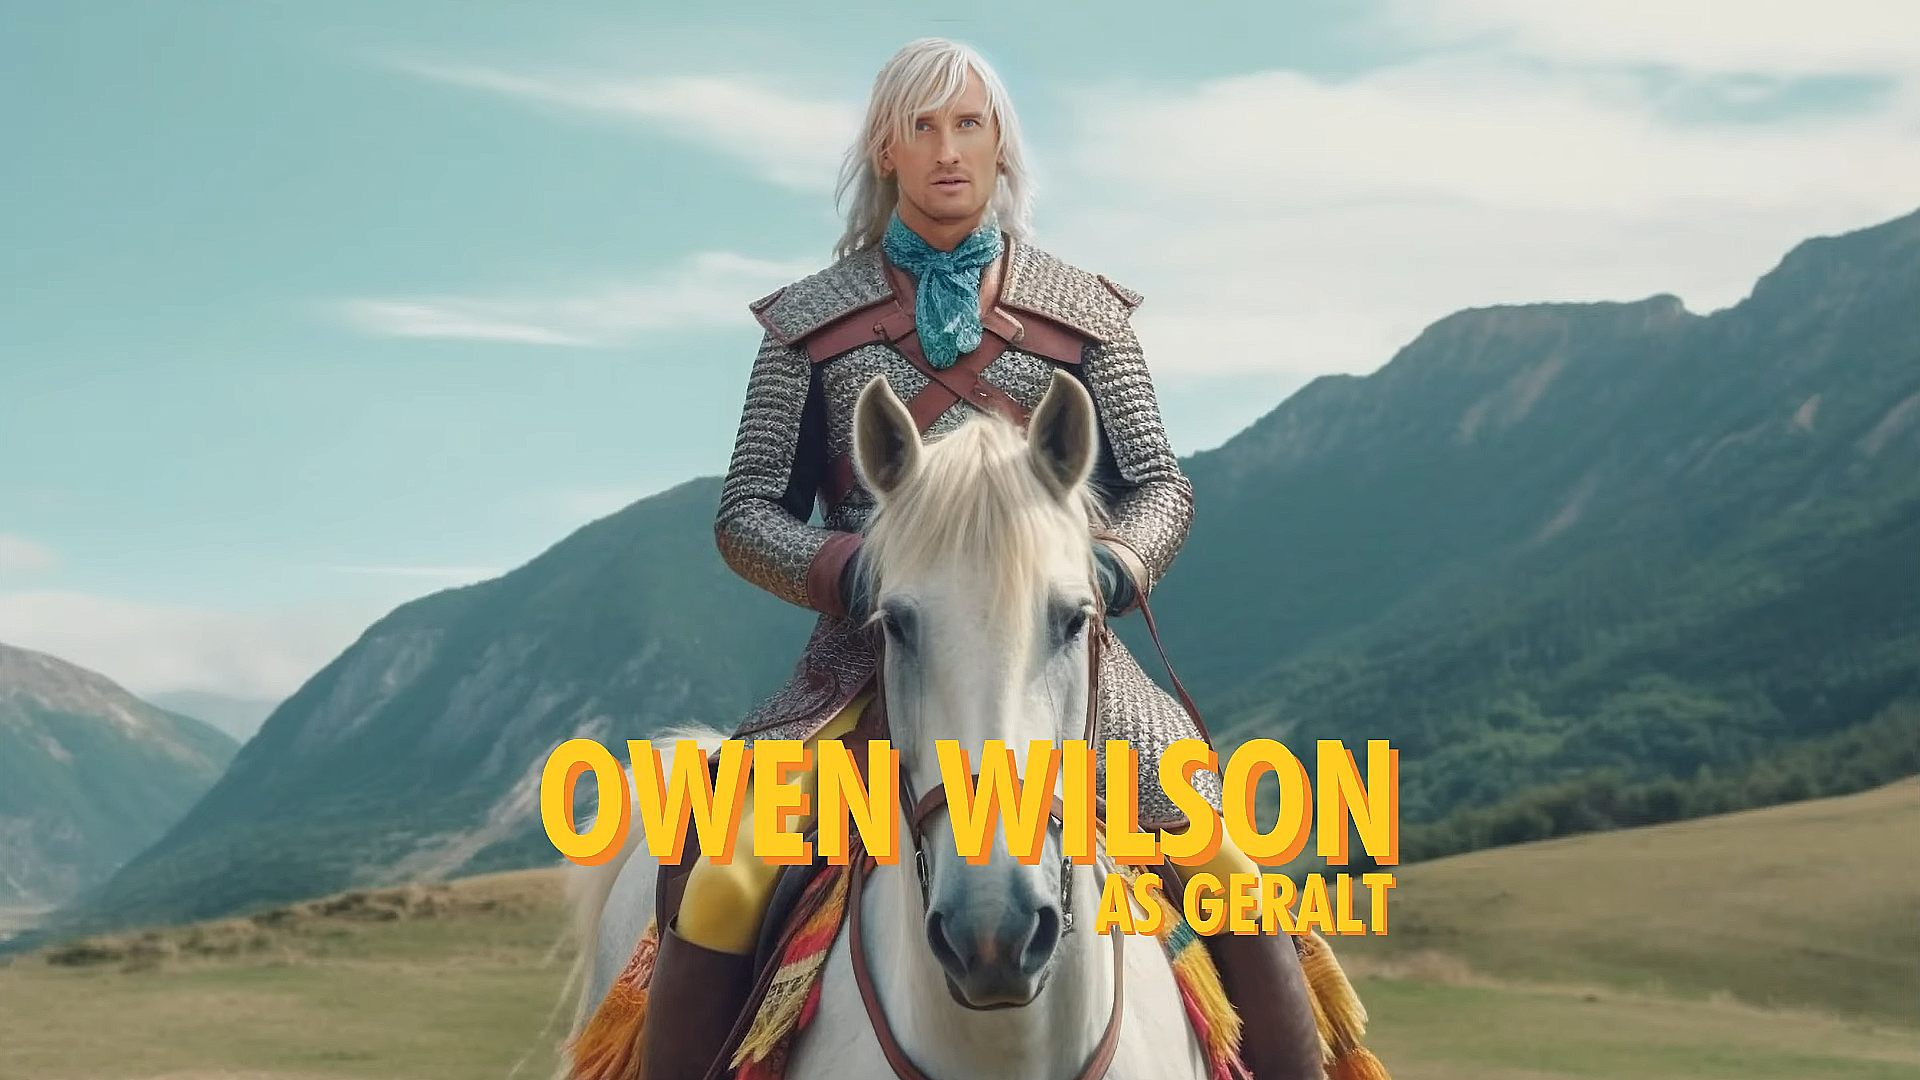 "The Witcher" in the lens of Wes Anderson: 16 vivid images from the neural network